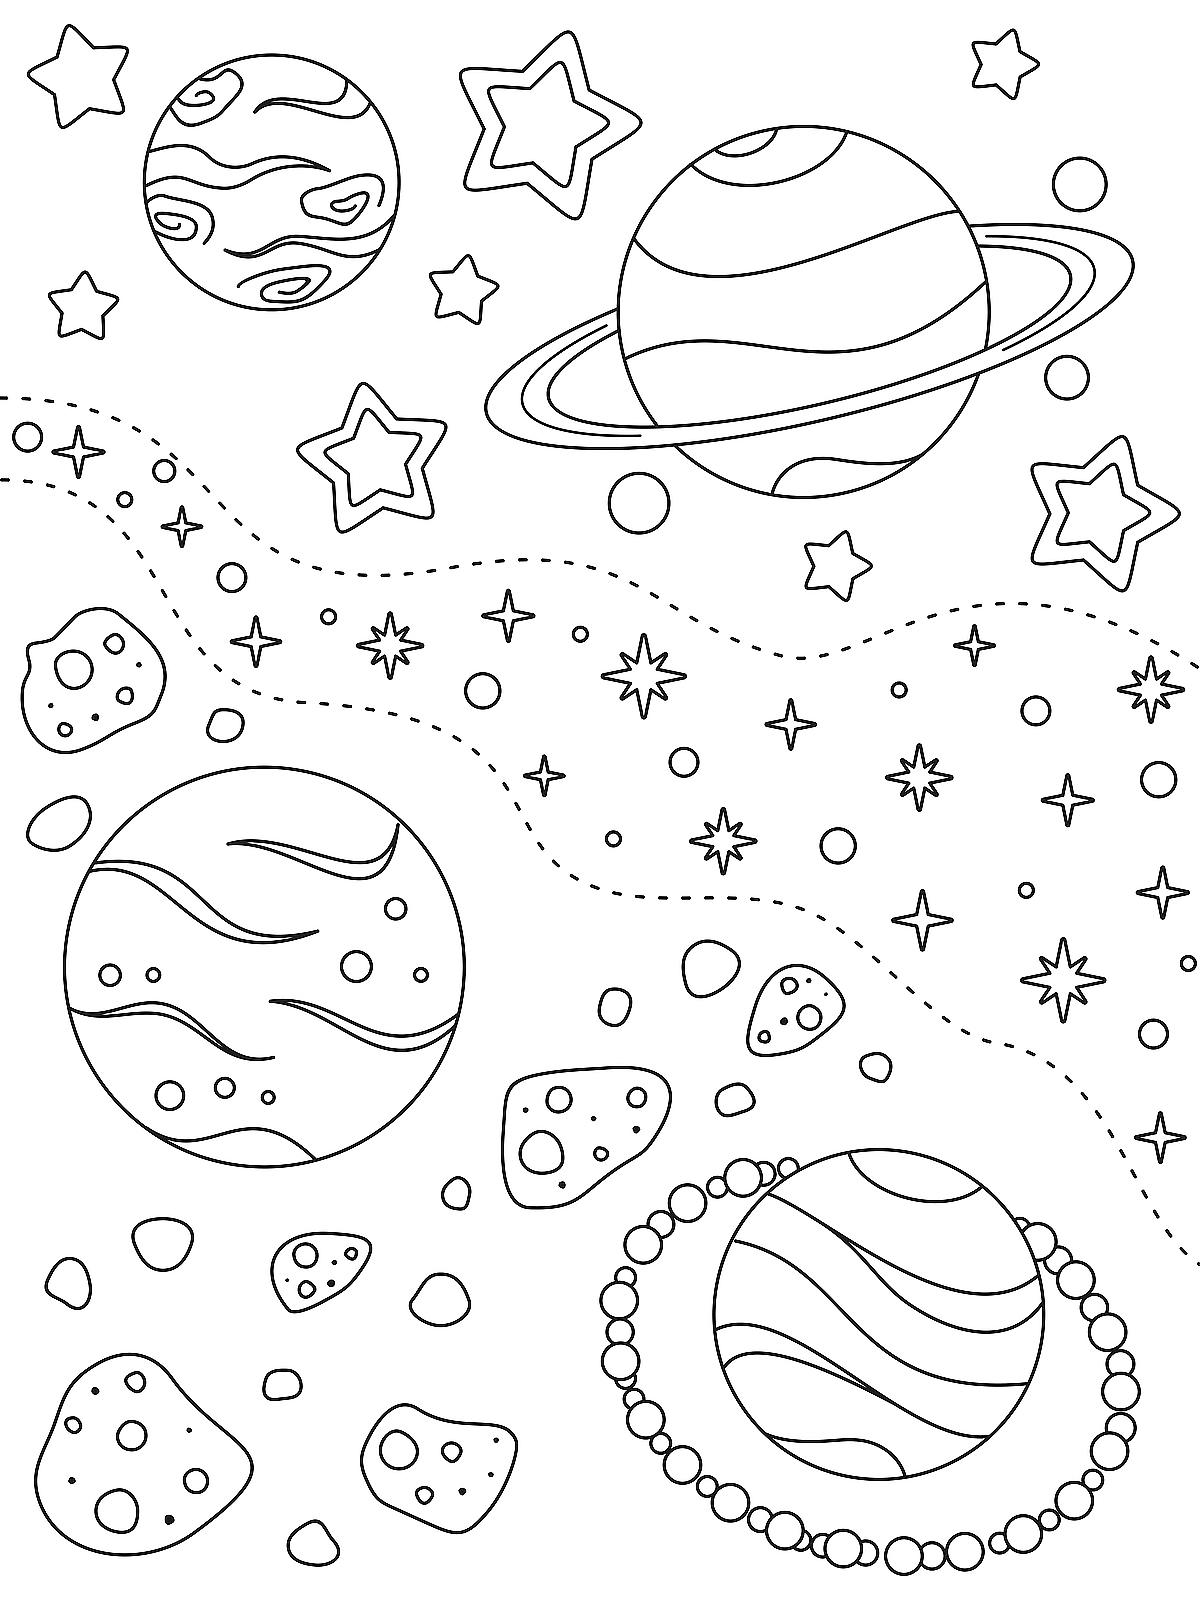 outer-space-coloring-page-for-kids-fun-free-printable-coloring-page